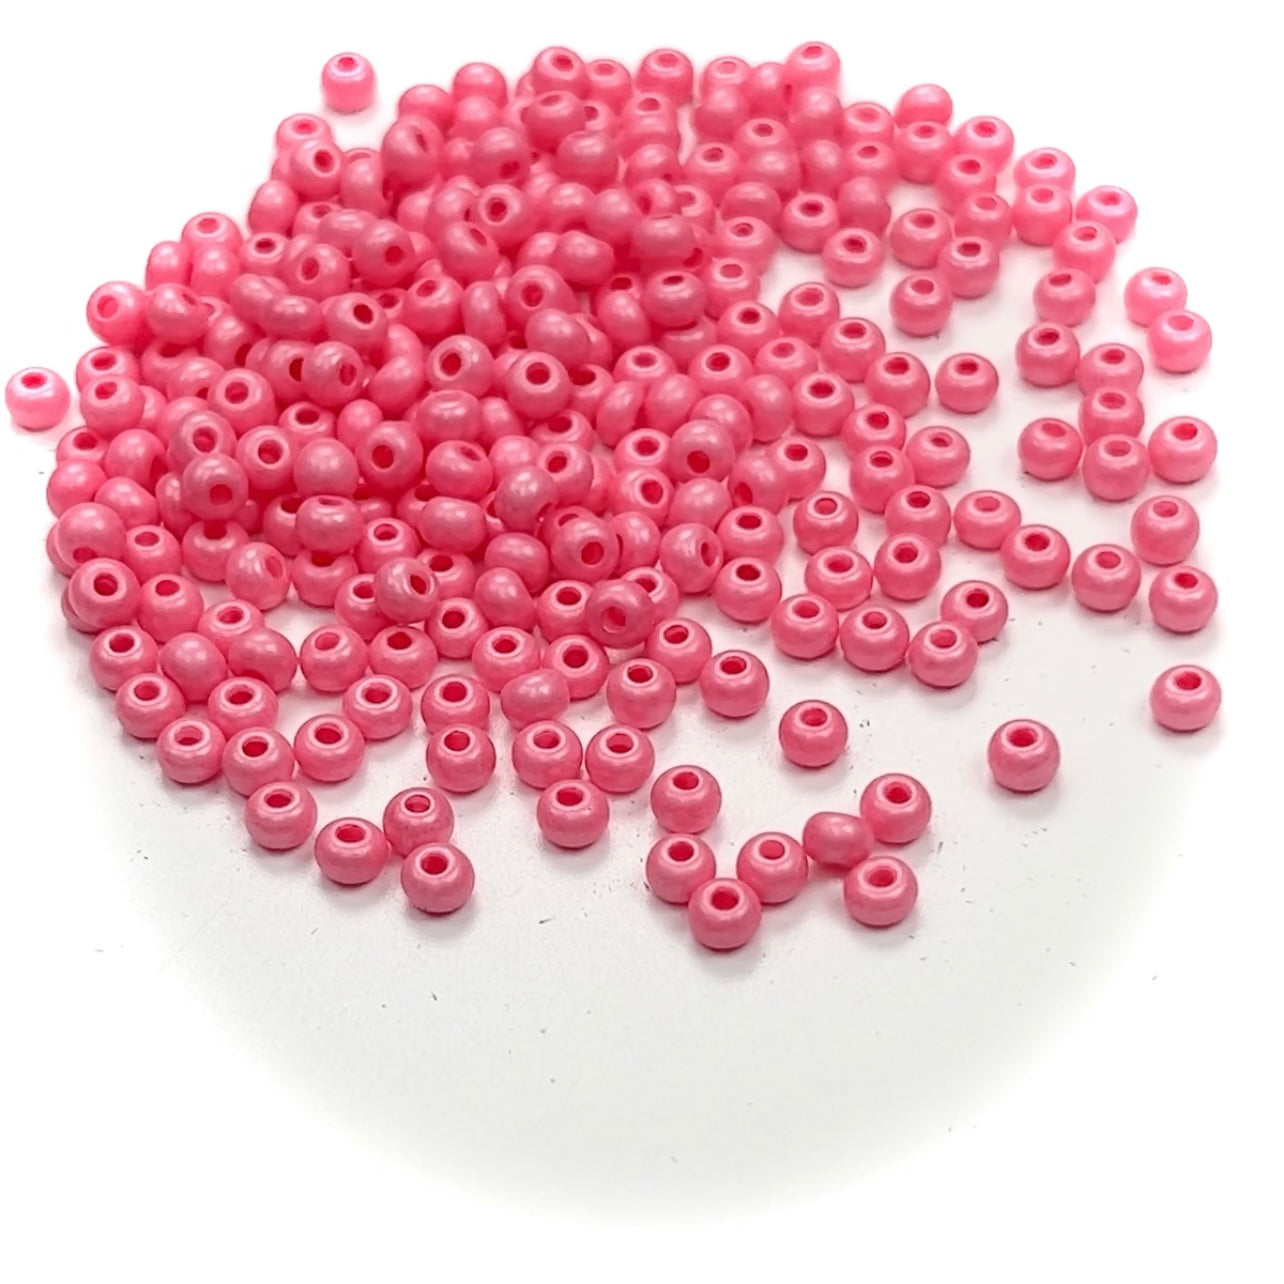 Rocailles size 6/0 (4mm) Sweet Pink Dyed, Preciosa Ornela Traditional Czech Glass Seed Beads, 30grams (1 oz), P956